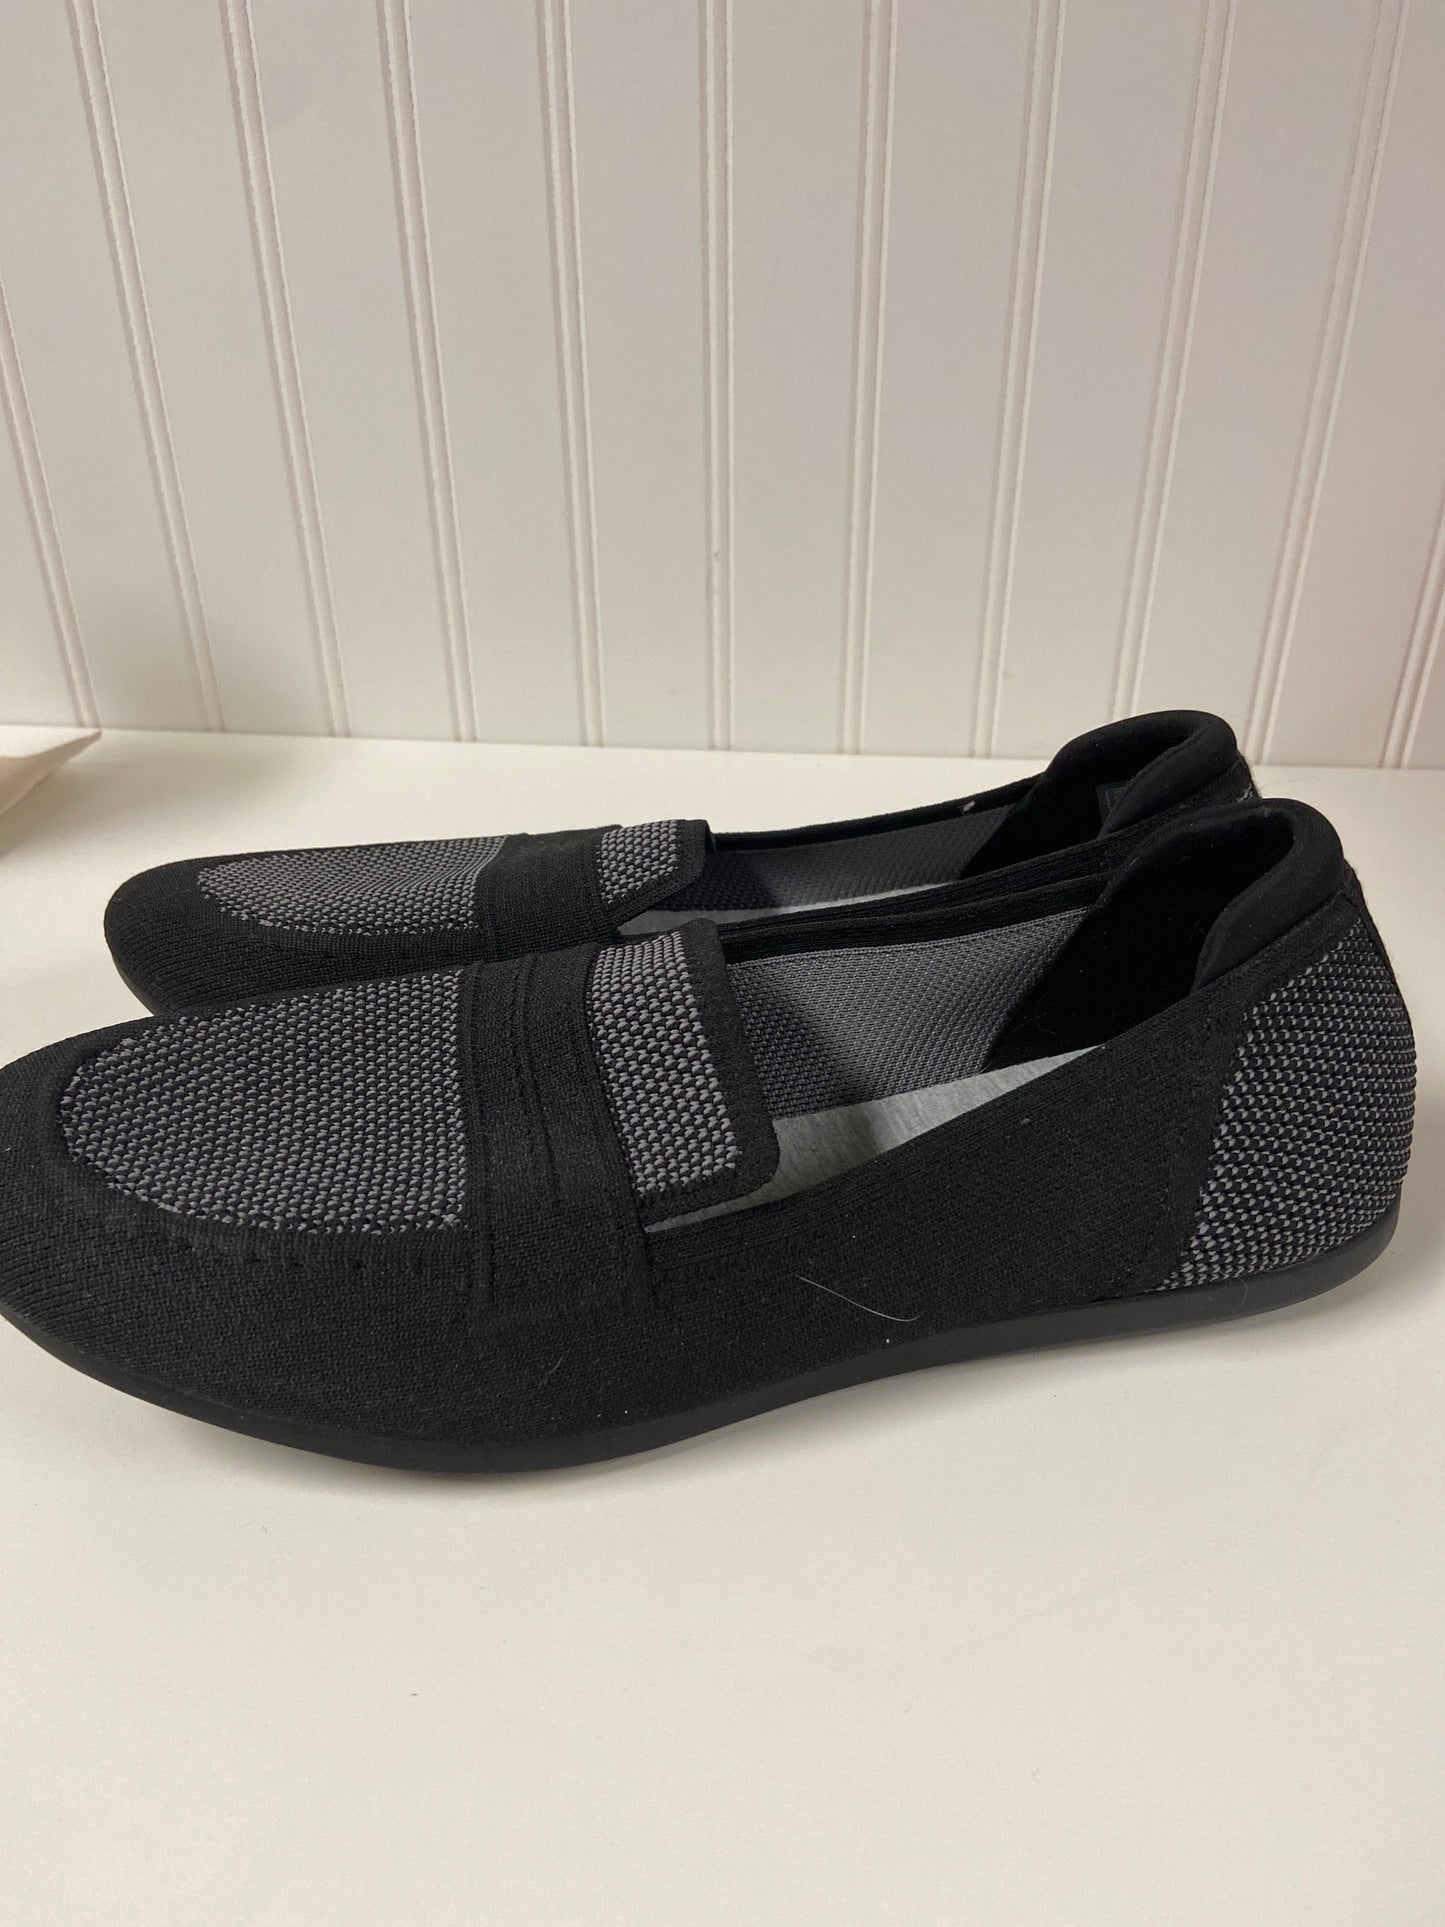 Shoes Flats By Clarks  Size: 12